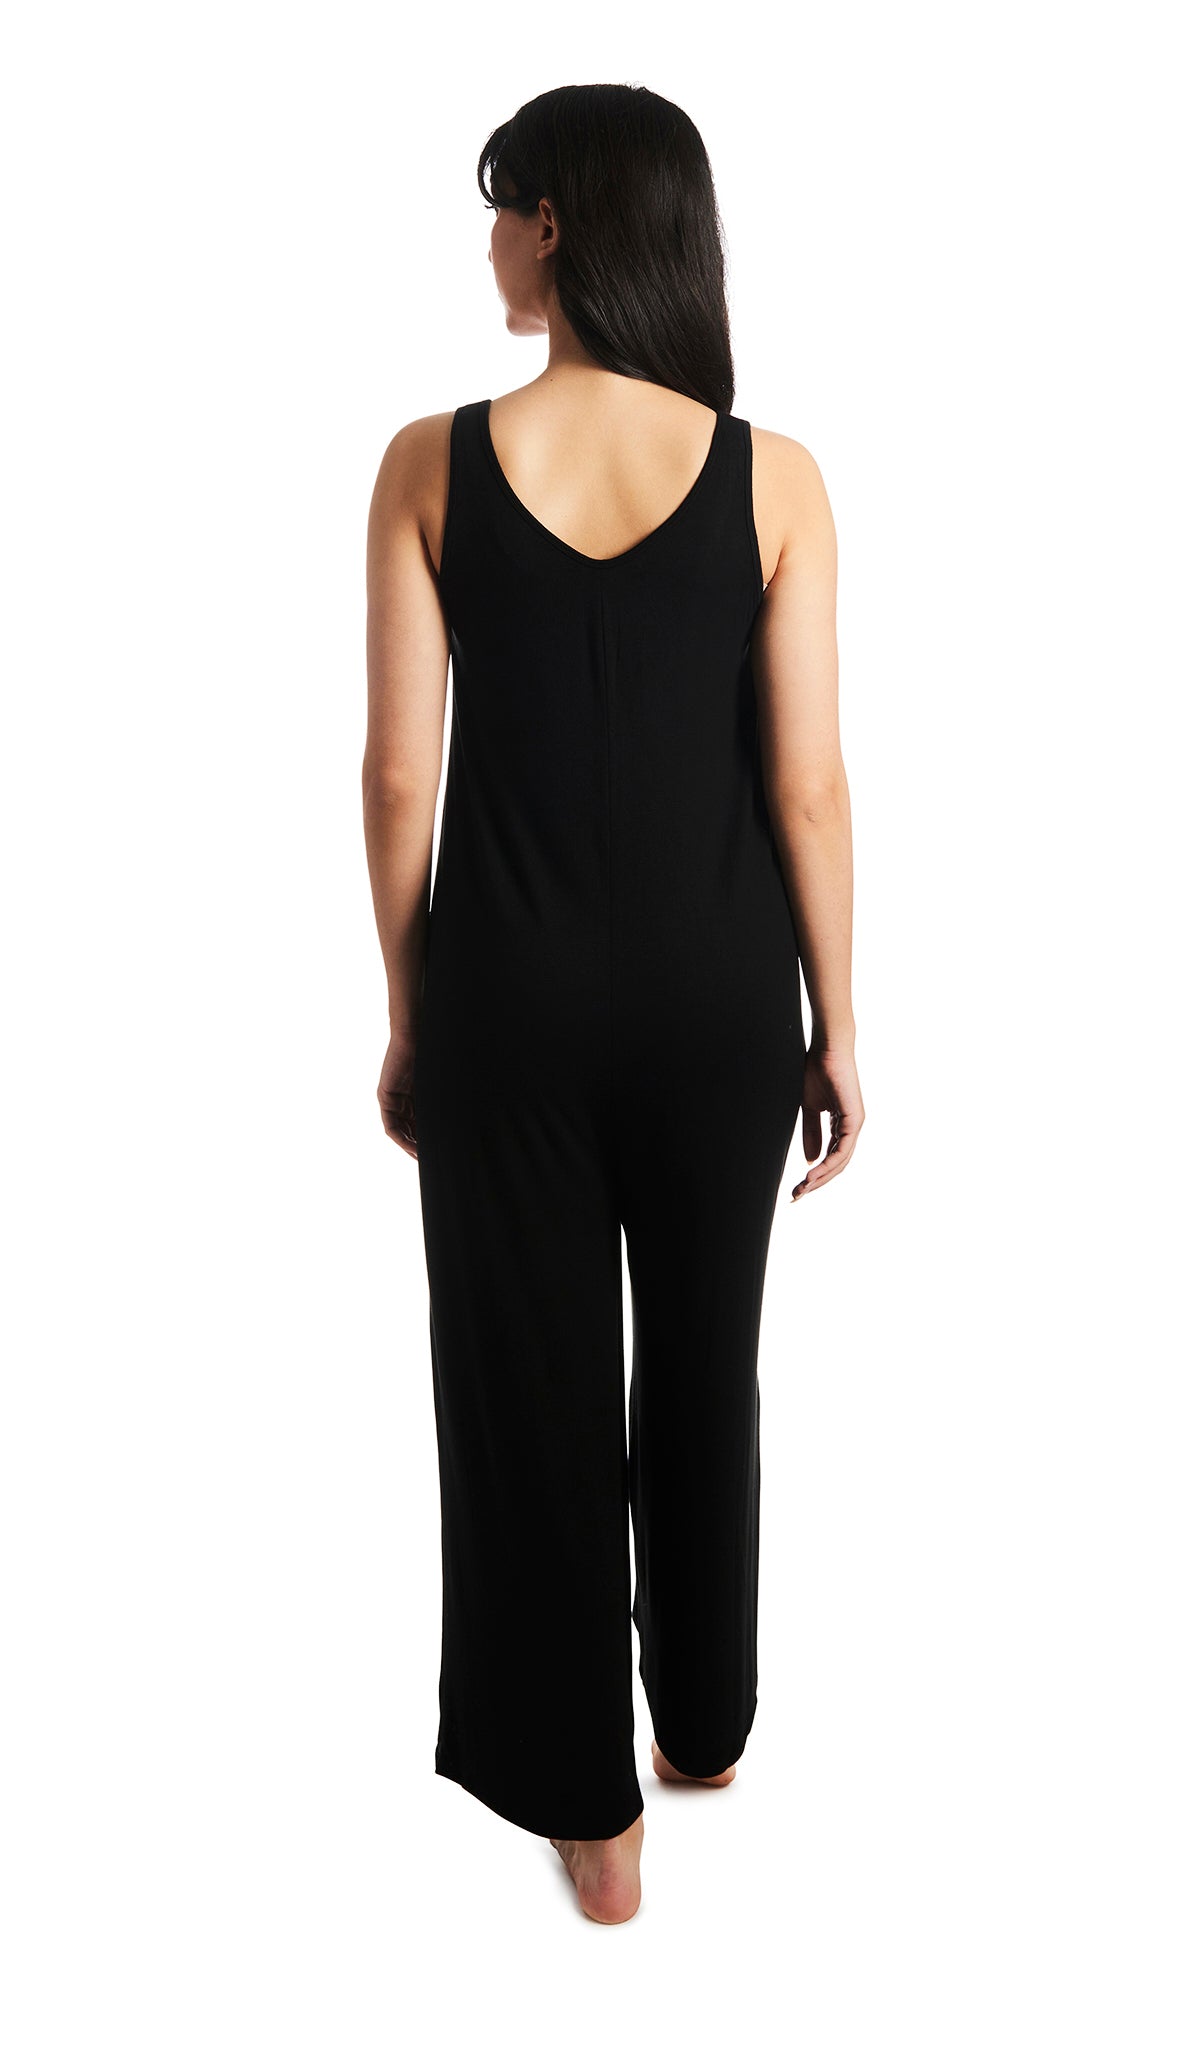 Black Luana romper. Back shot of woman wearing sleeveless wide-leg romper with arms down to side.